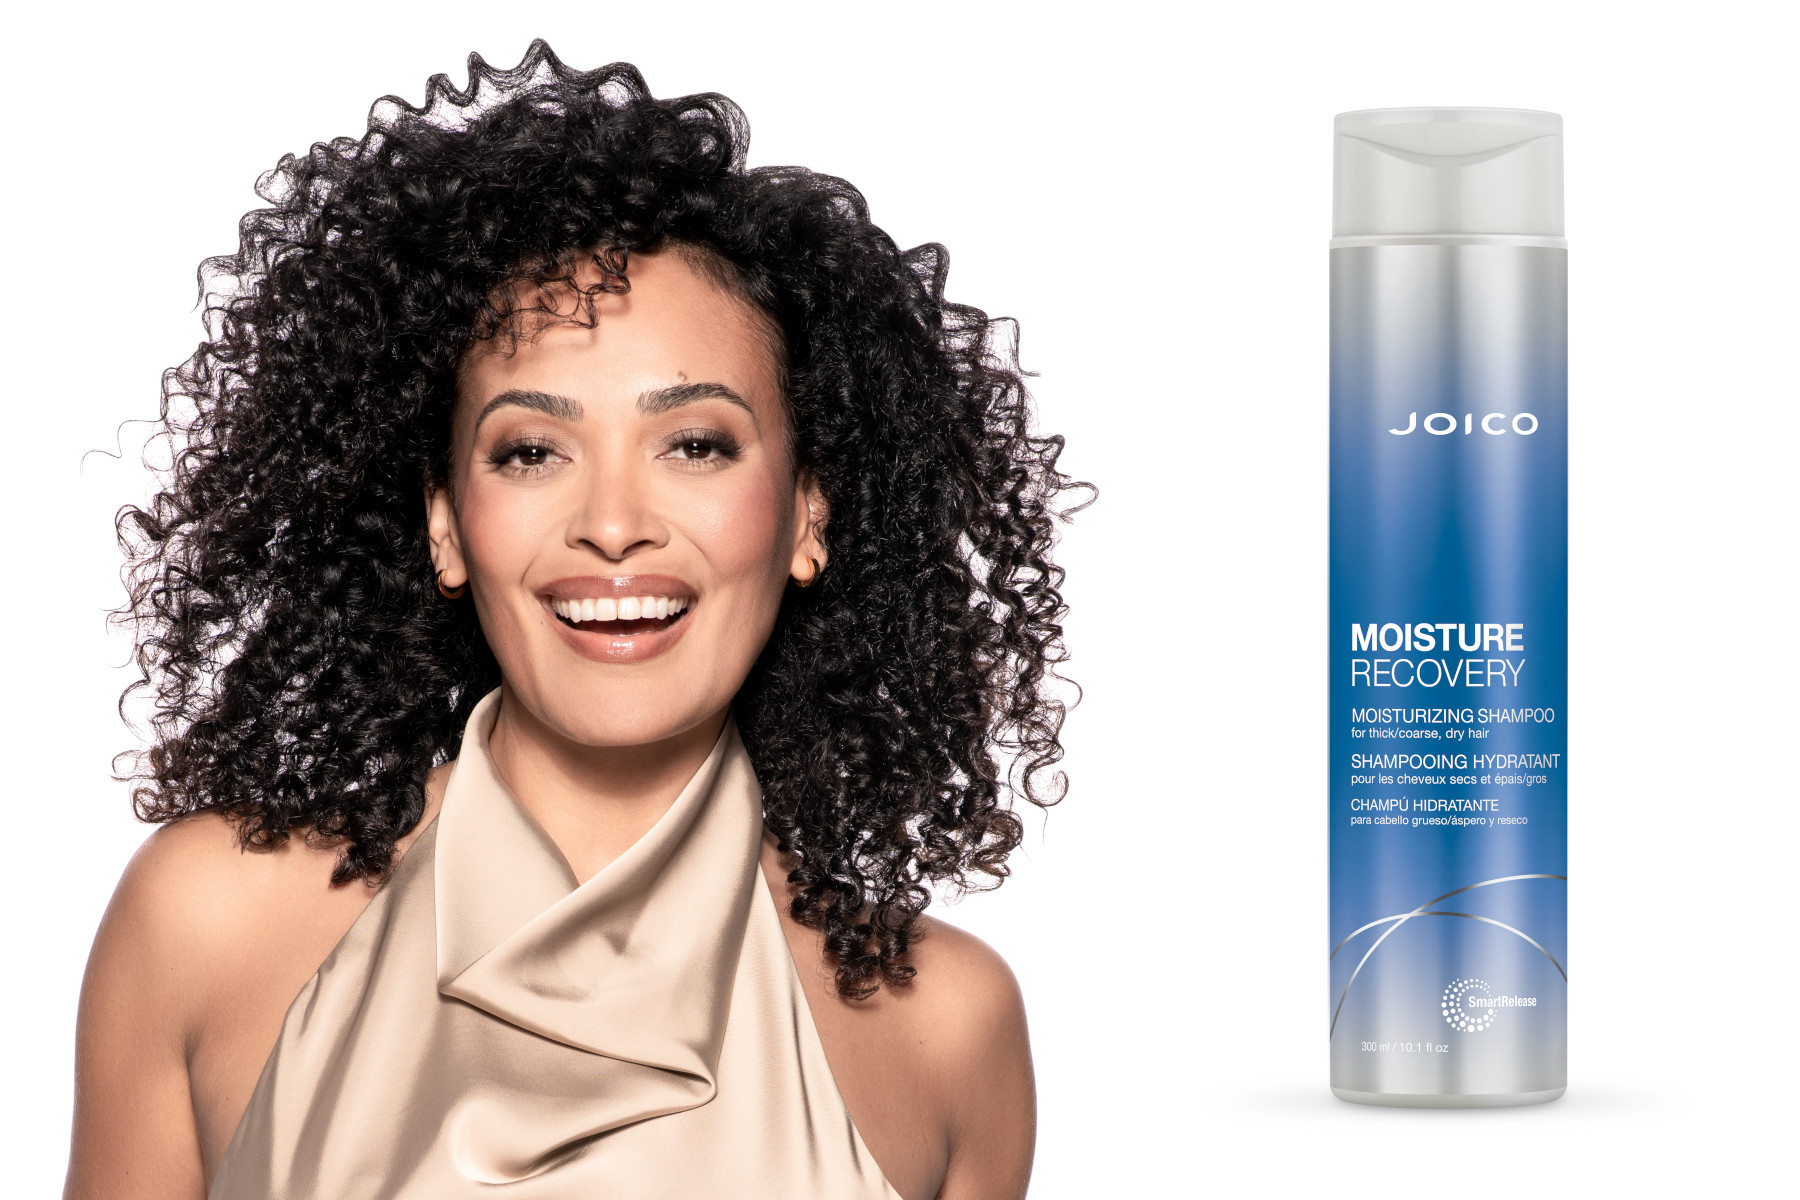 moisture recovery shampoo with model